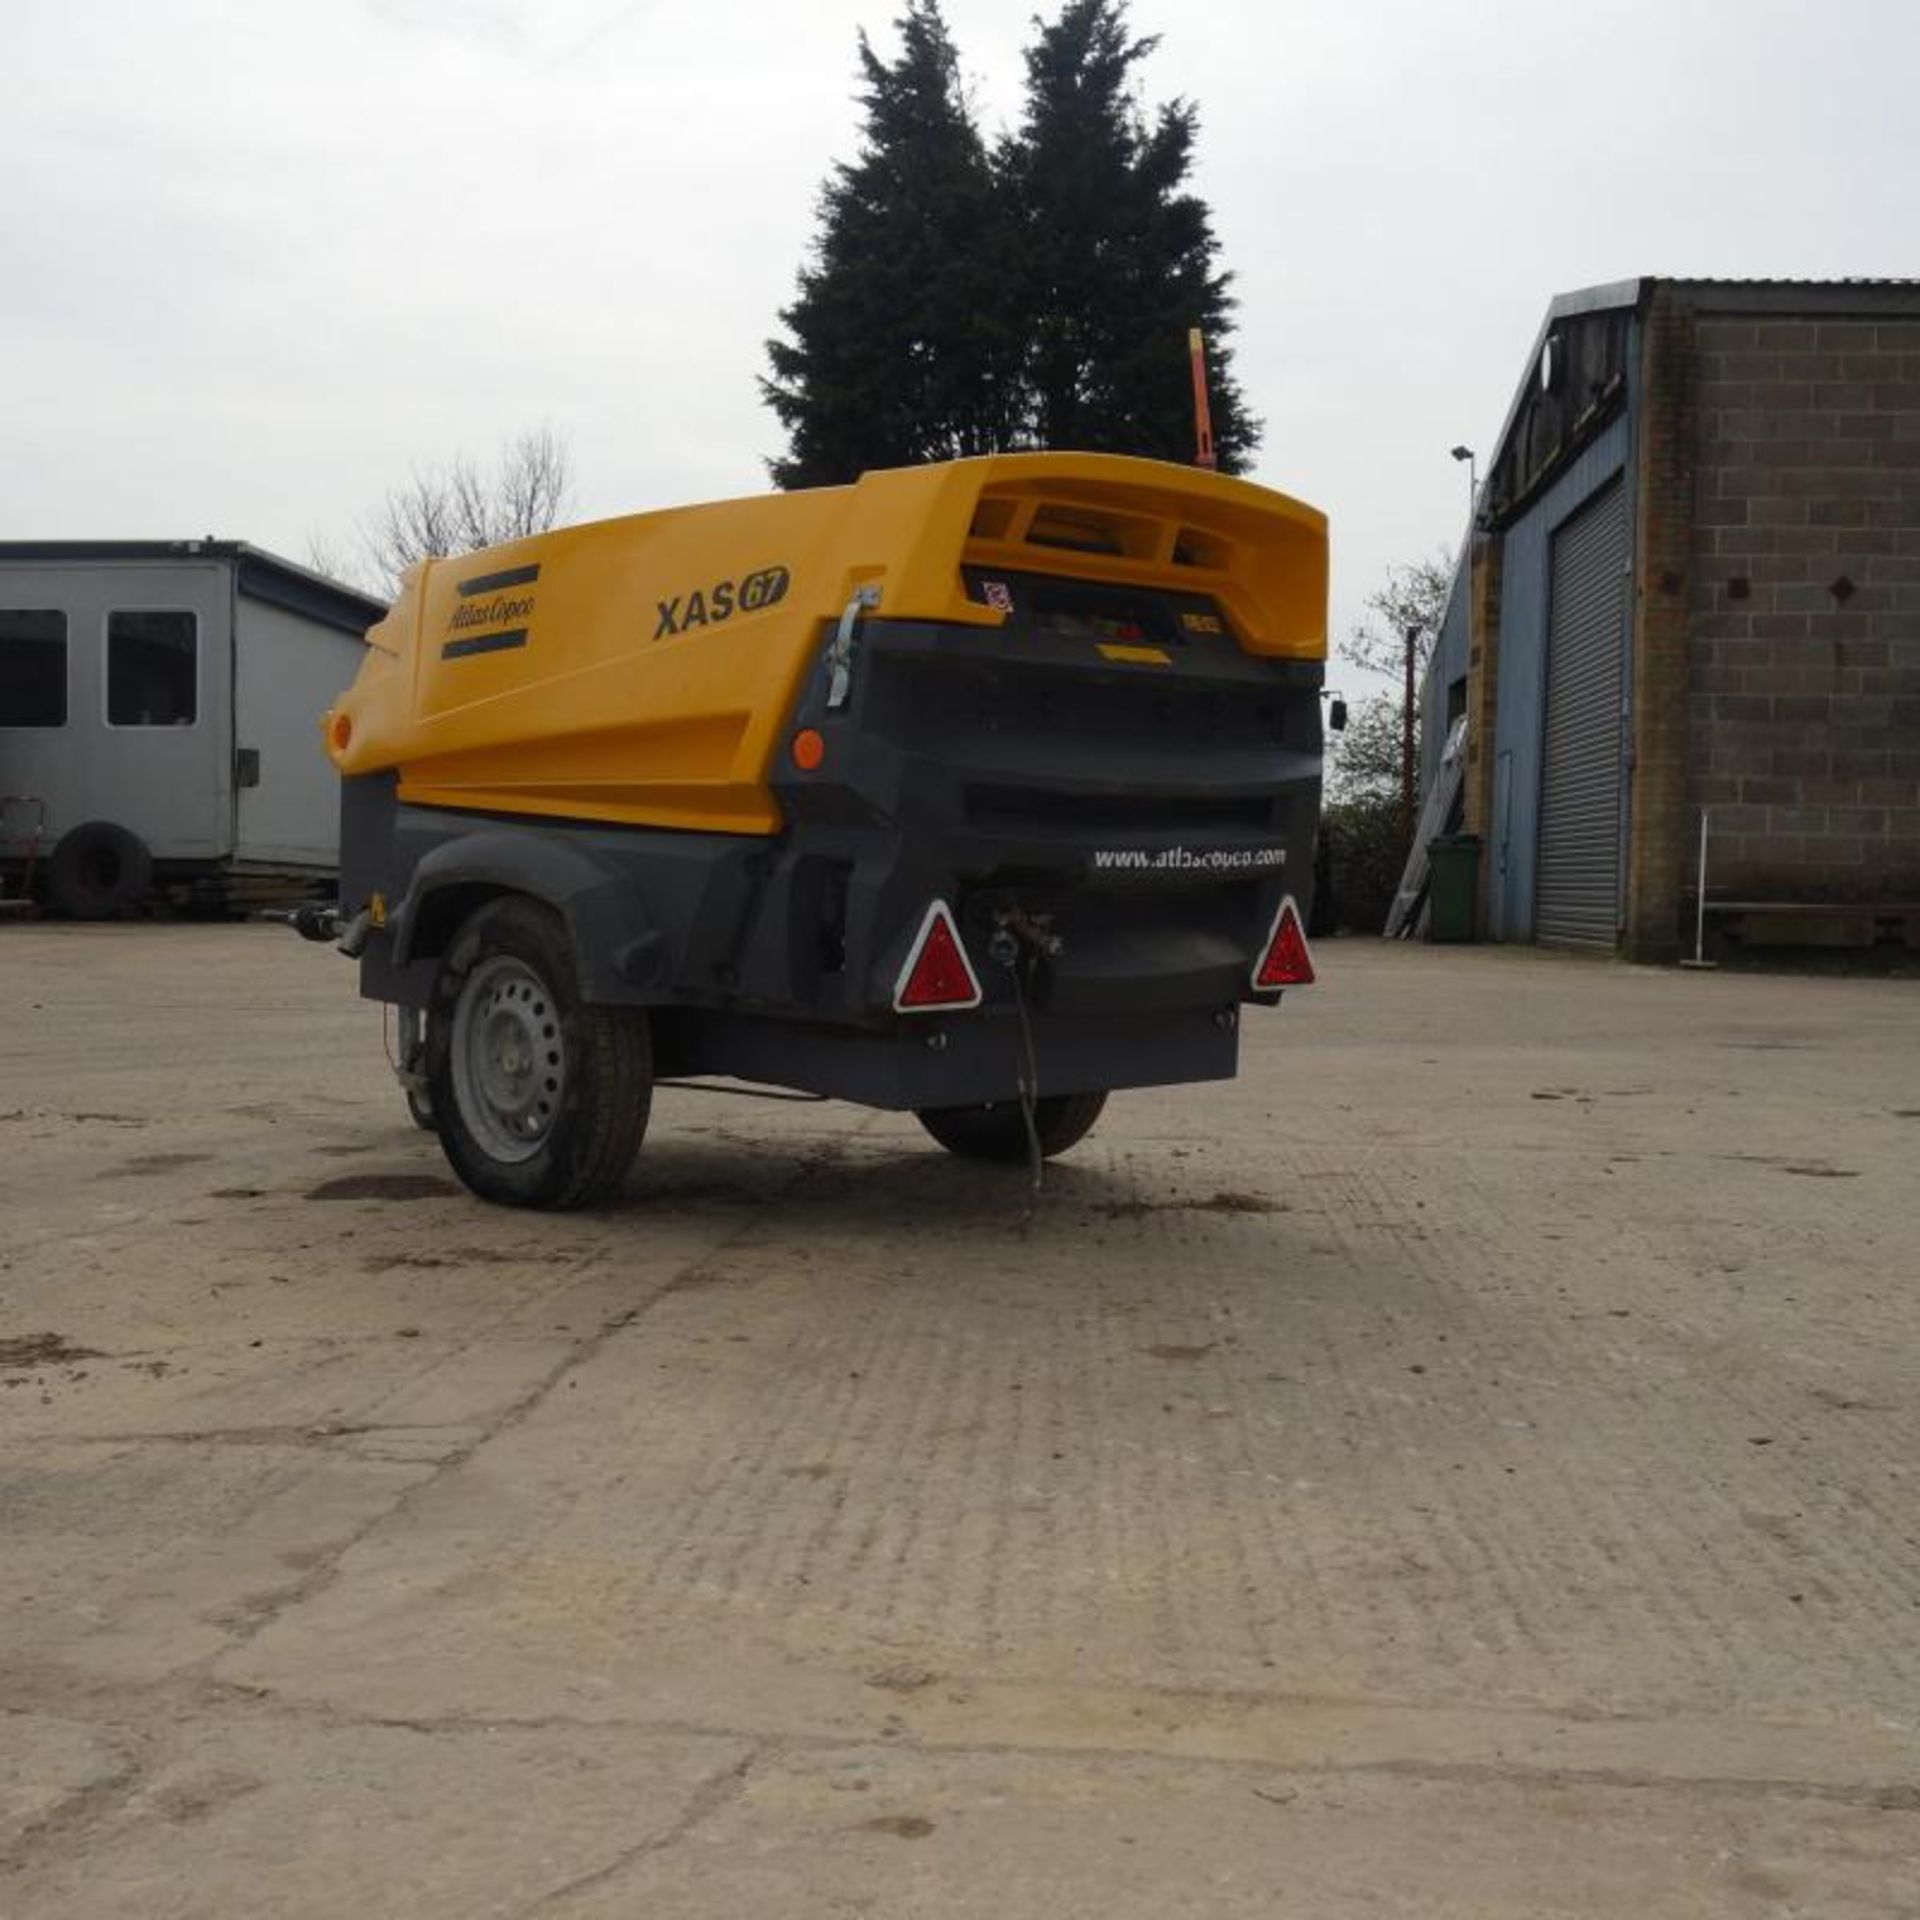 2015 Atlas Copco Xas 67 Compressor, 936 Hours From New - Image 5 of 6